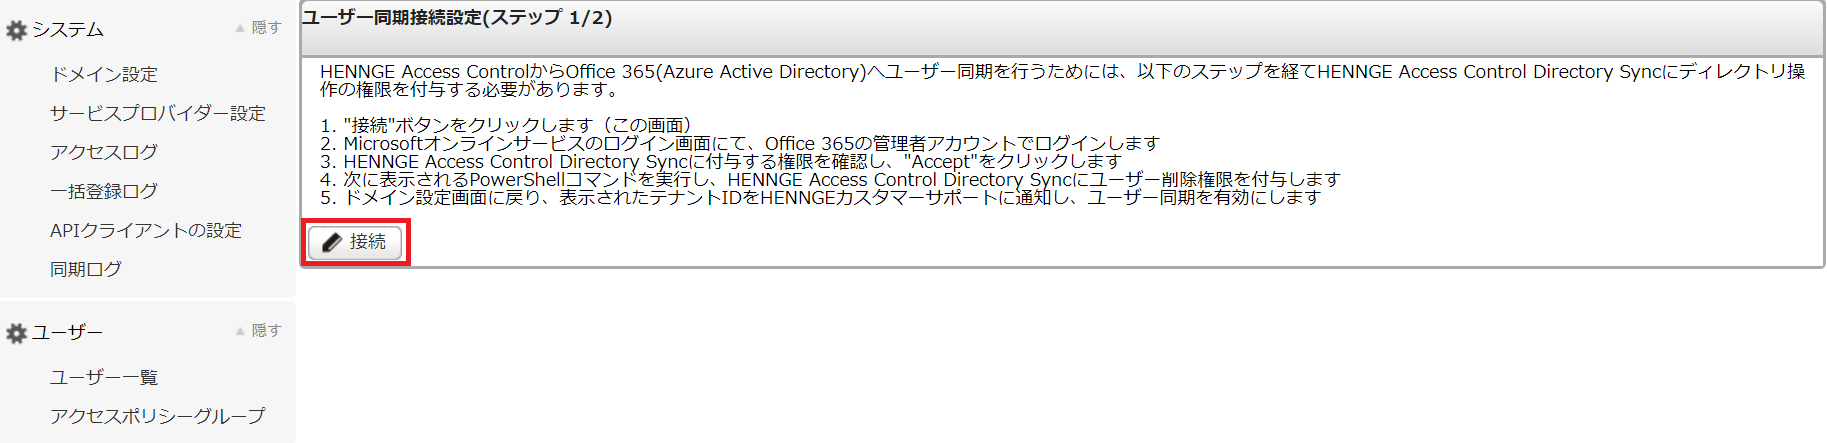 HENNGE_Access_Control_Directory_Sync____3.png